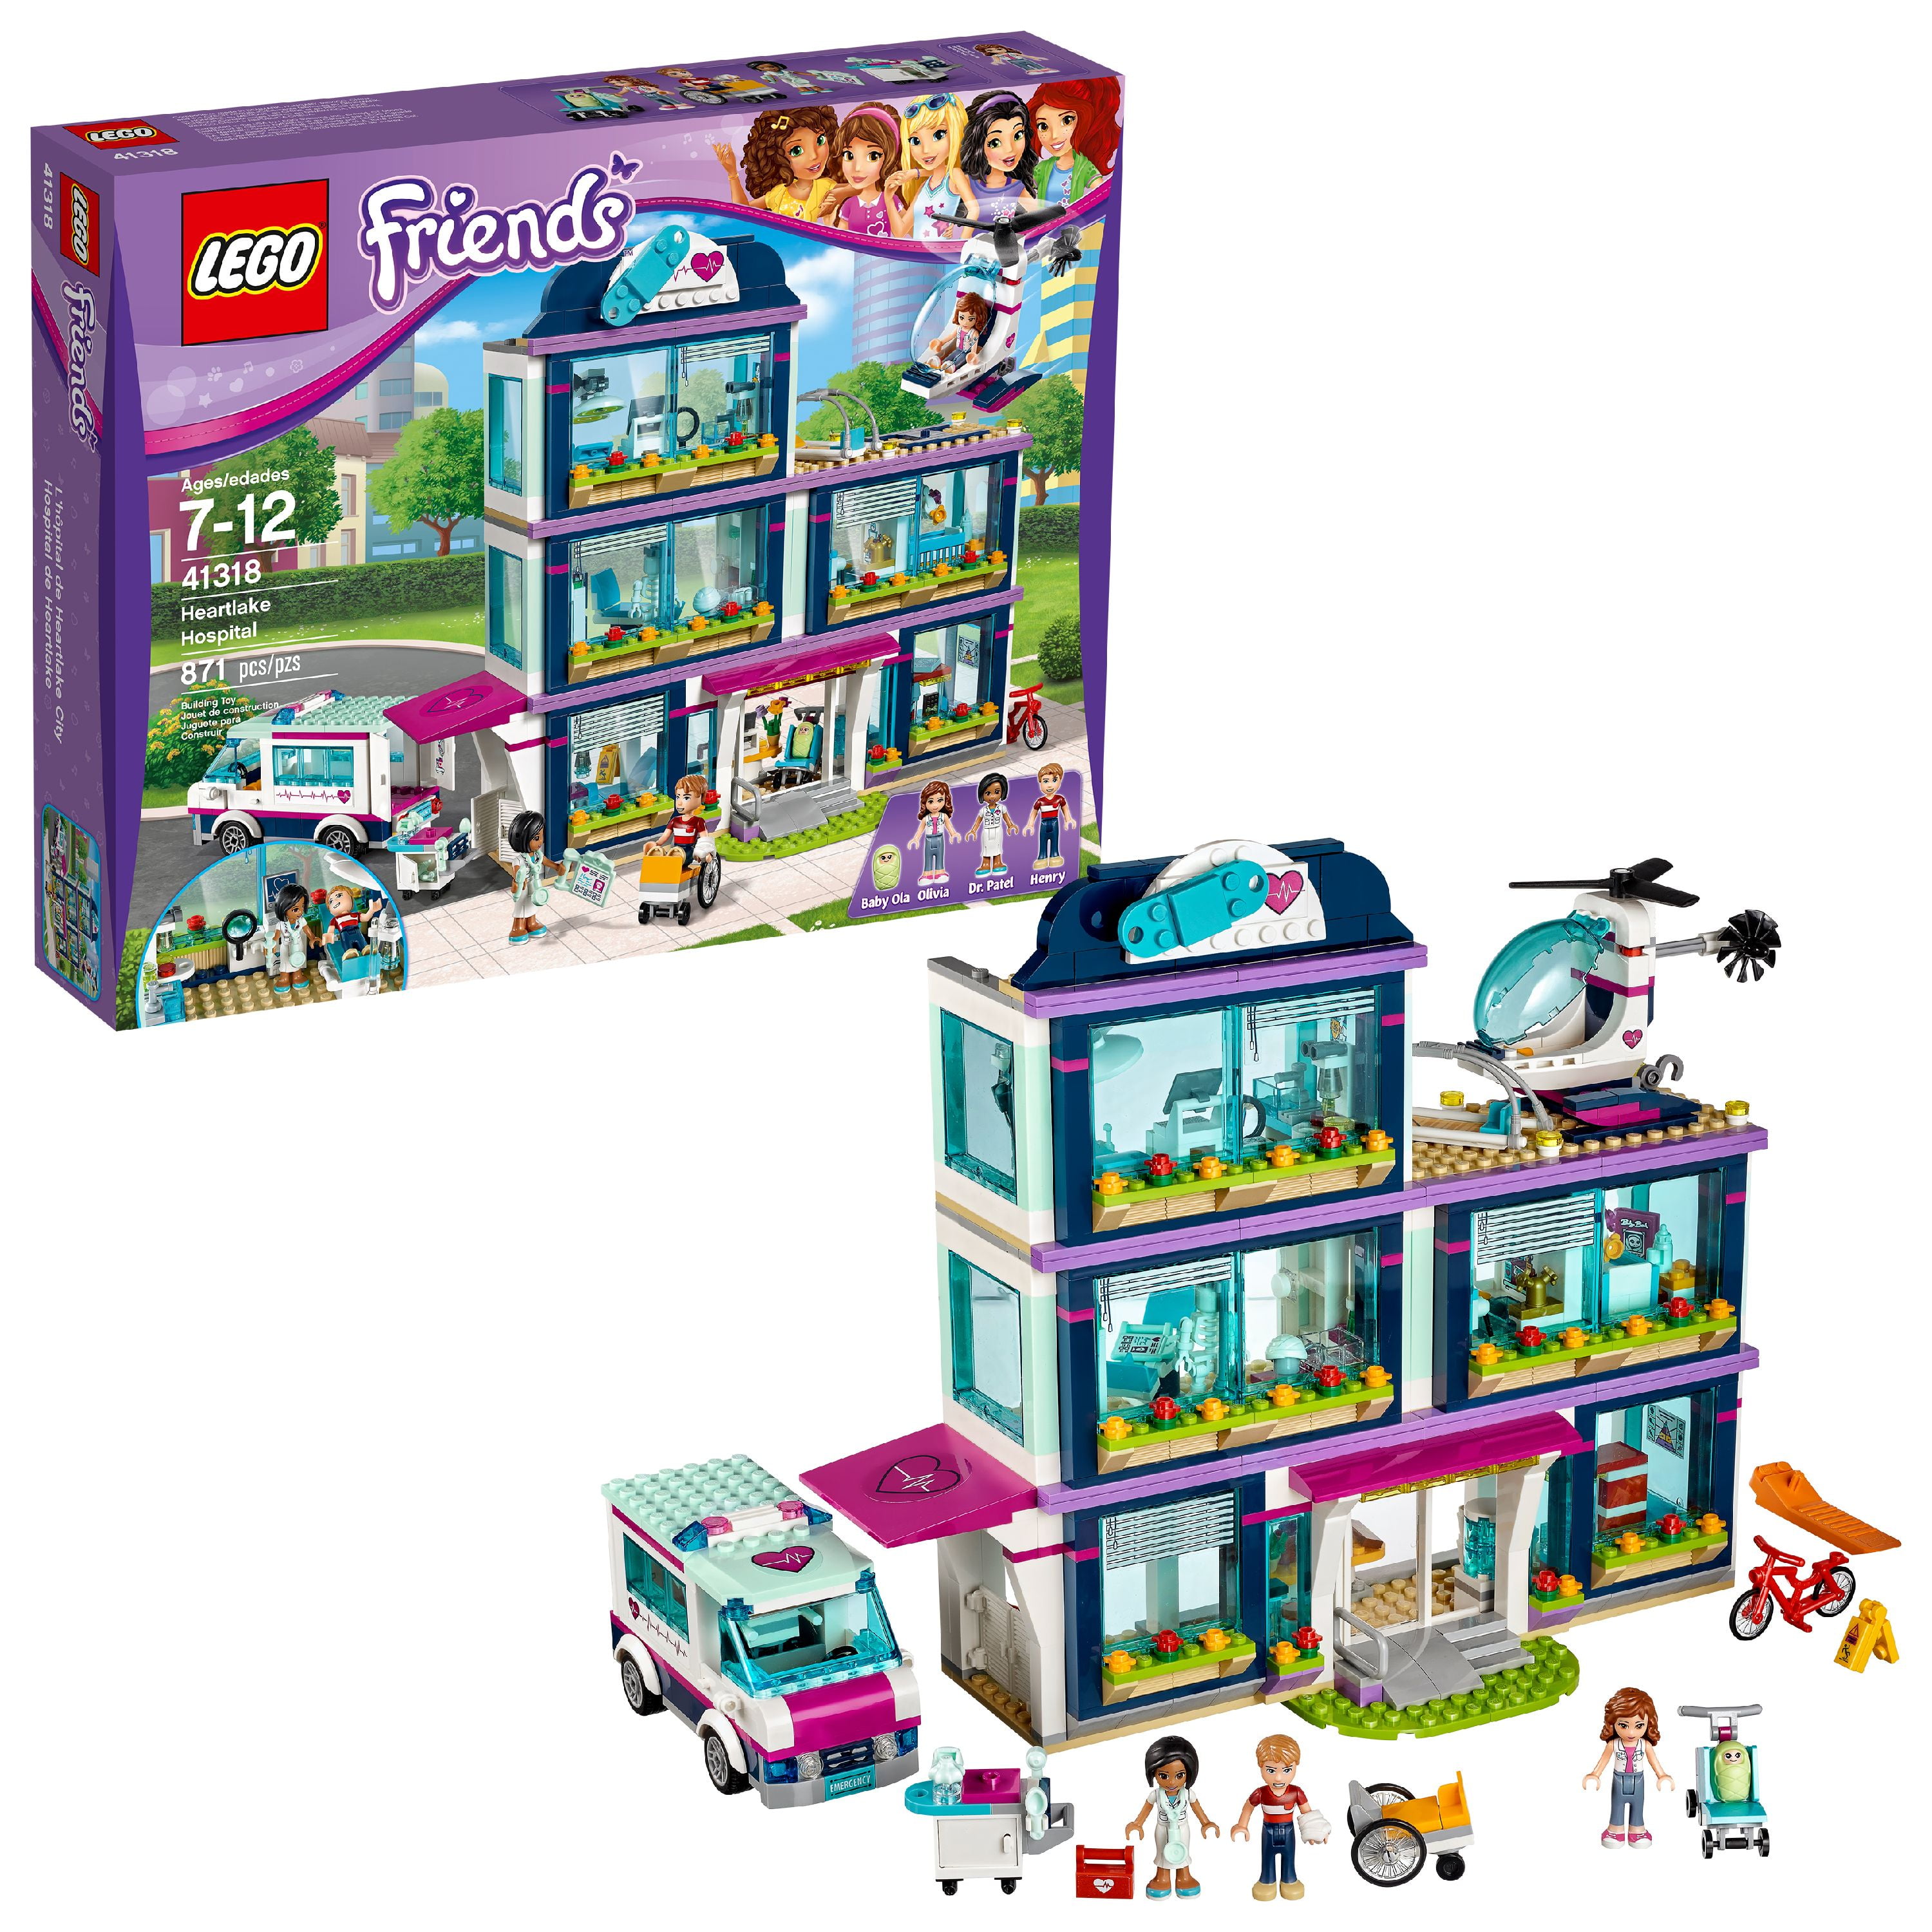 Lego Friends Stephanie's House for sale online 41314